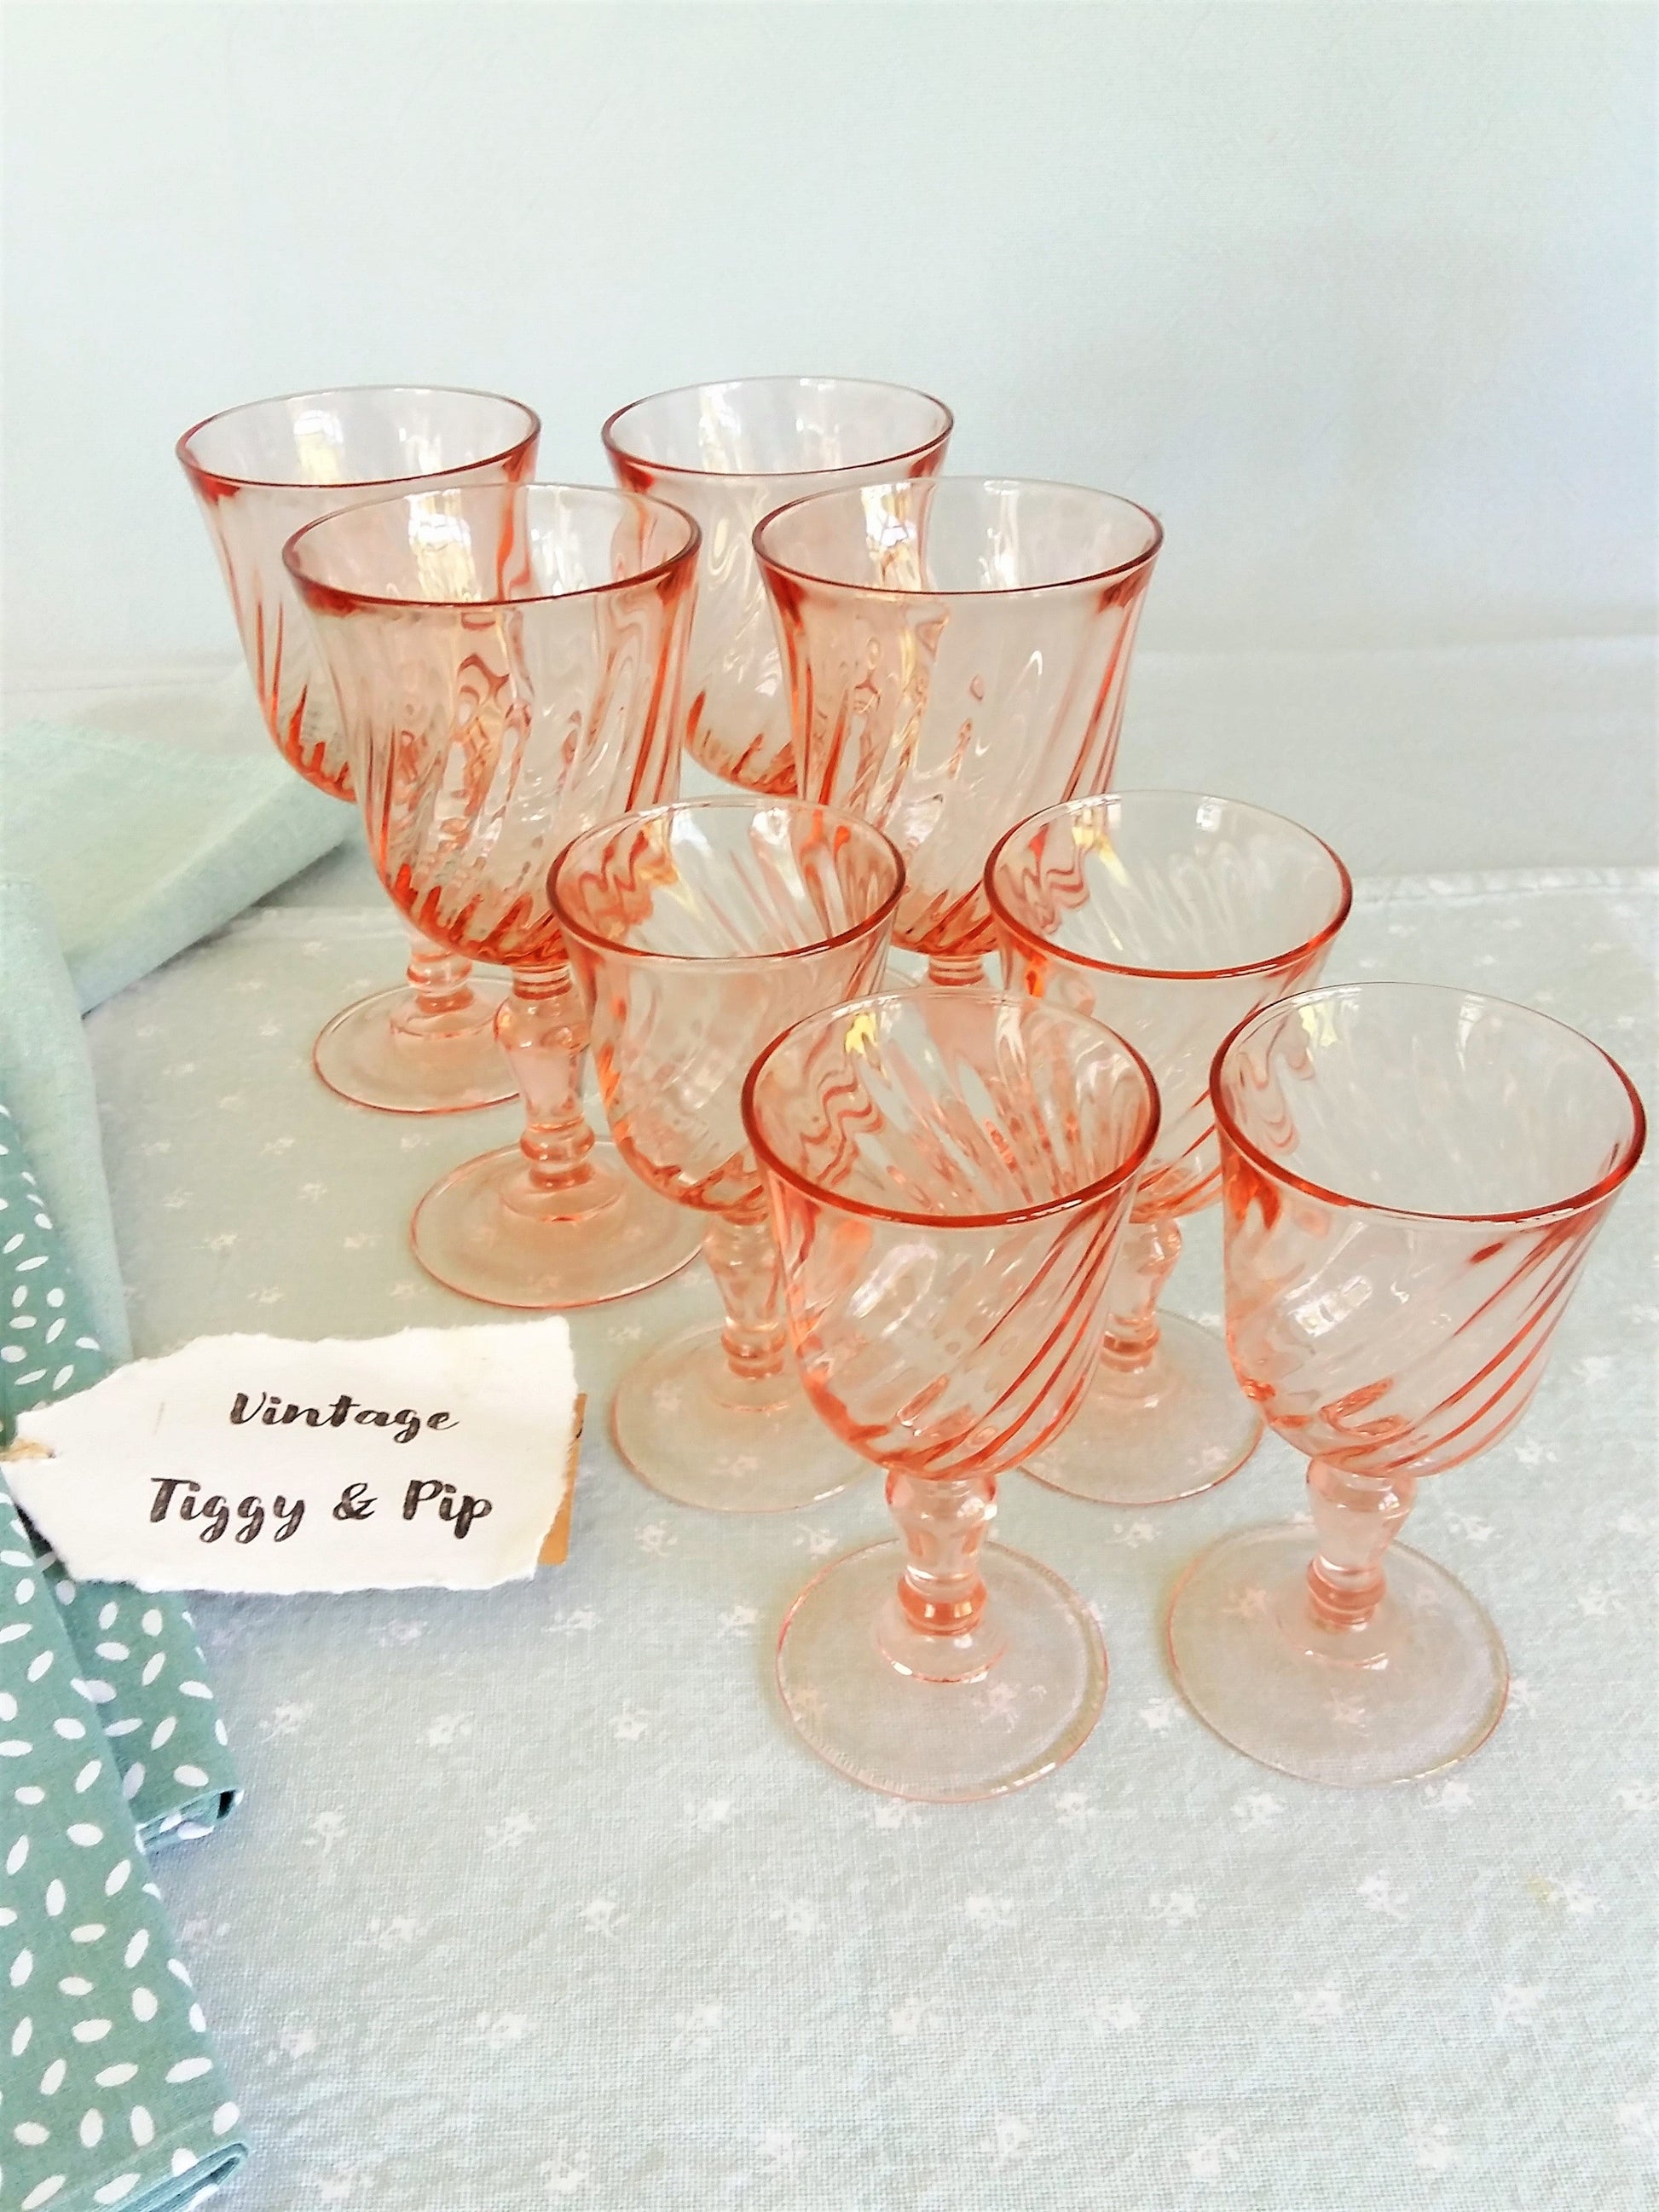 Vintage Pink Glassware. EIGHT Glasses. from Tiggy & Pip - €128.00! Shop now at Tiggy and Pip